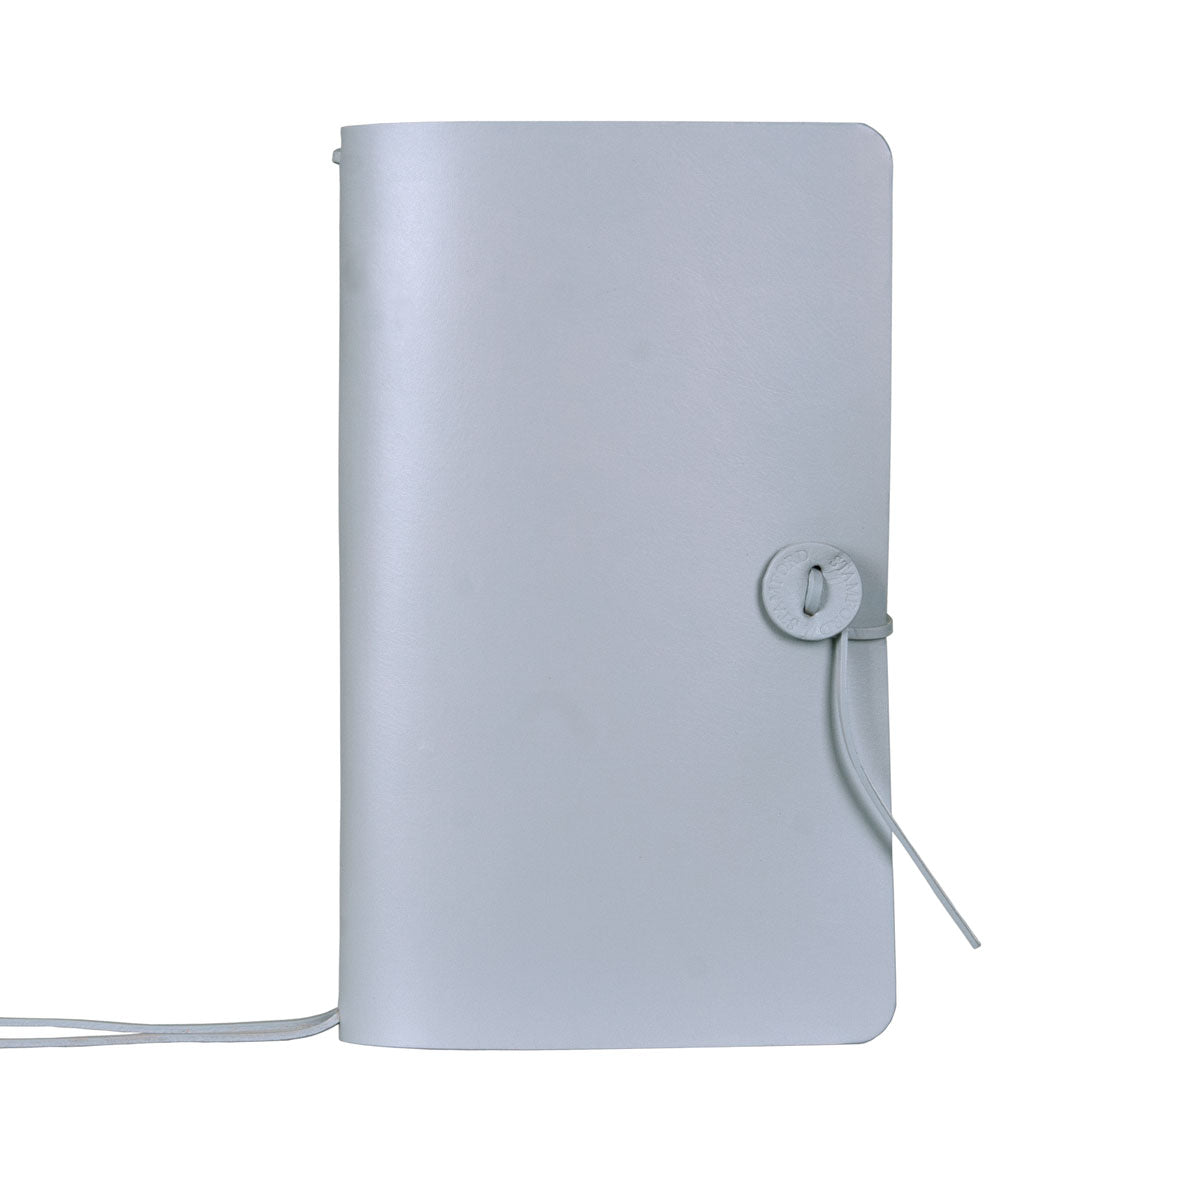 Mid Grey refillable leather travellers Journal